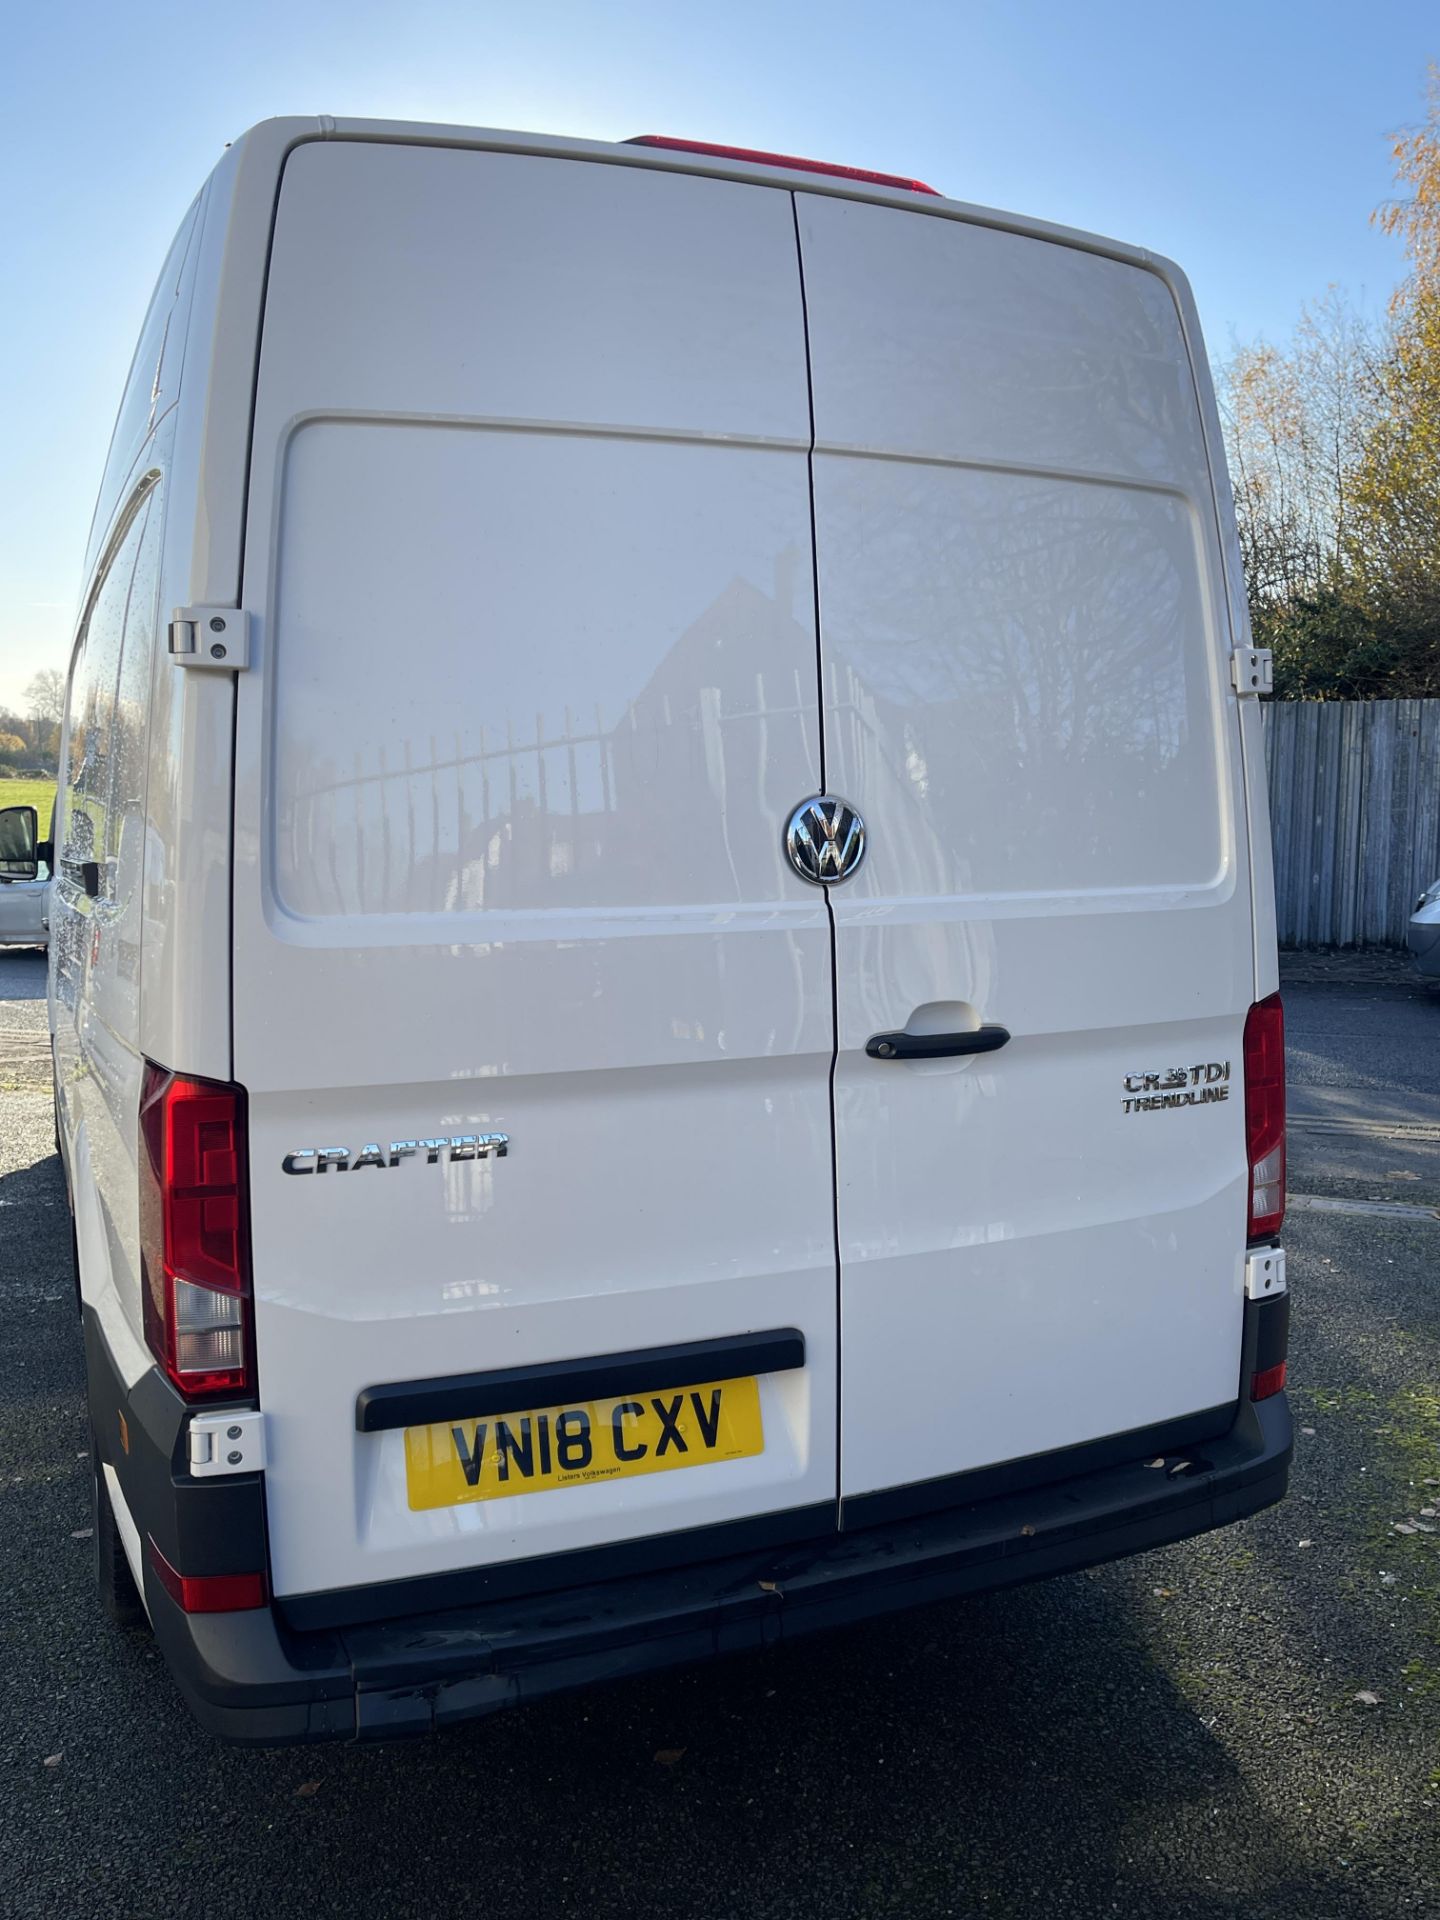 2018 - VW Crafter CR35 102PS Trend Line LWB TDI - Image 9 of 34